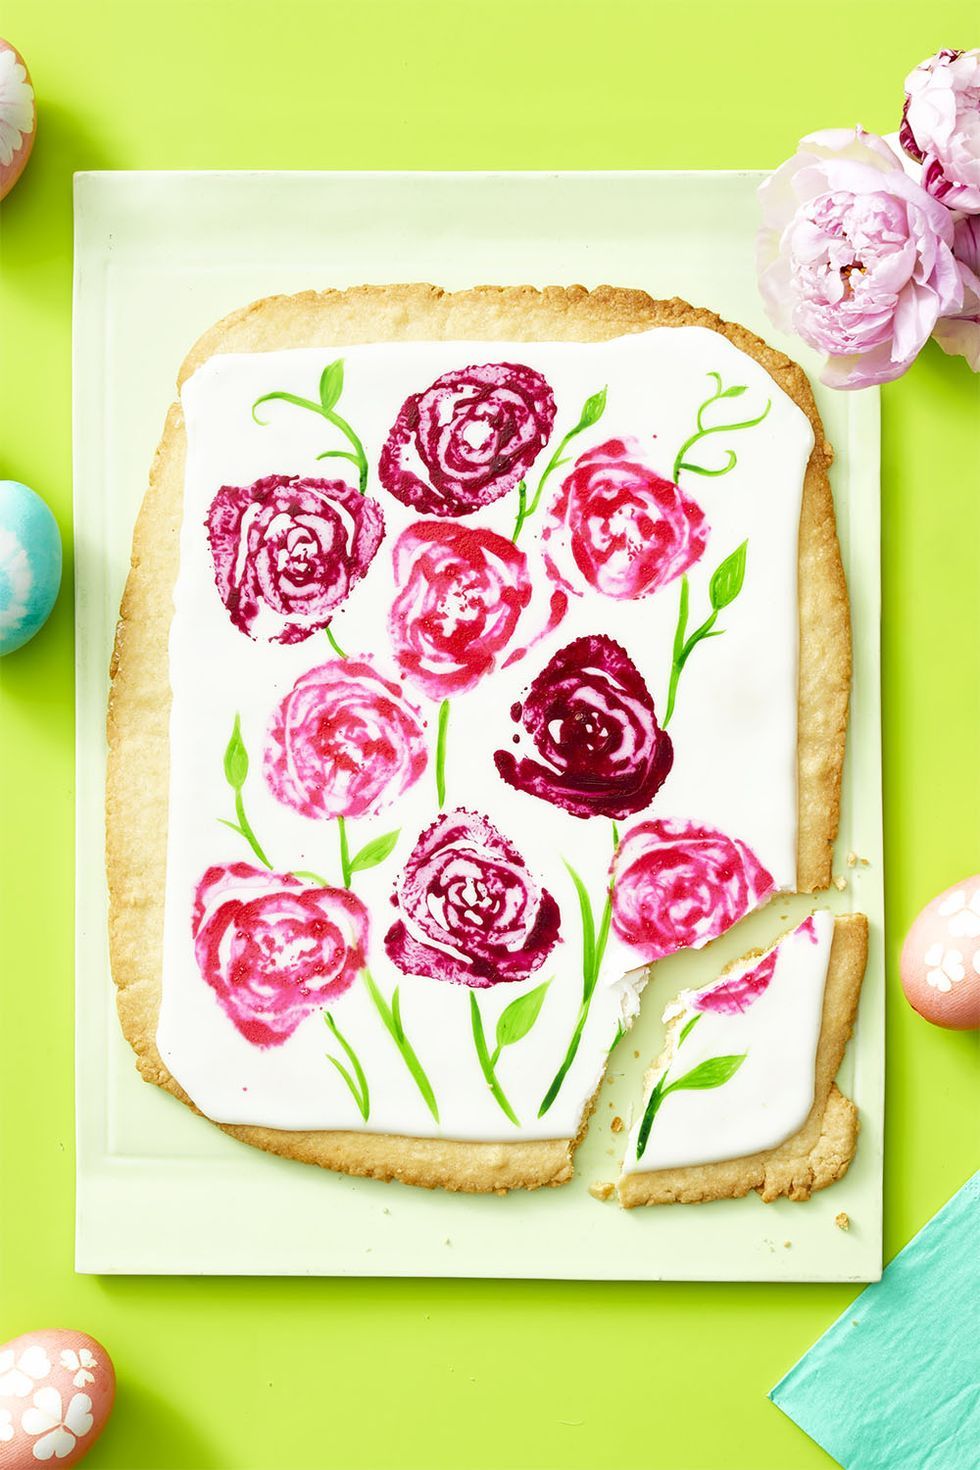 https://hips.hearstapps.com/hmg-prod/images/free-mothers-day-gifts-baked-goods-1615665053.jpg